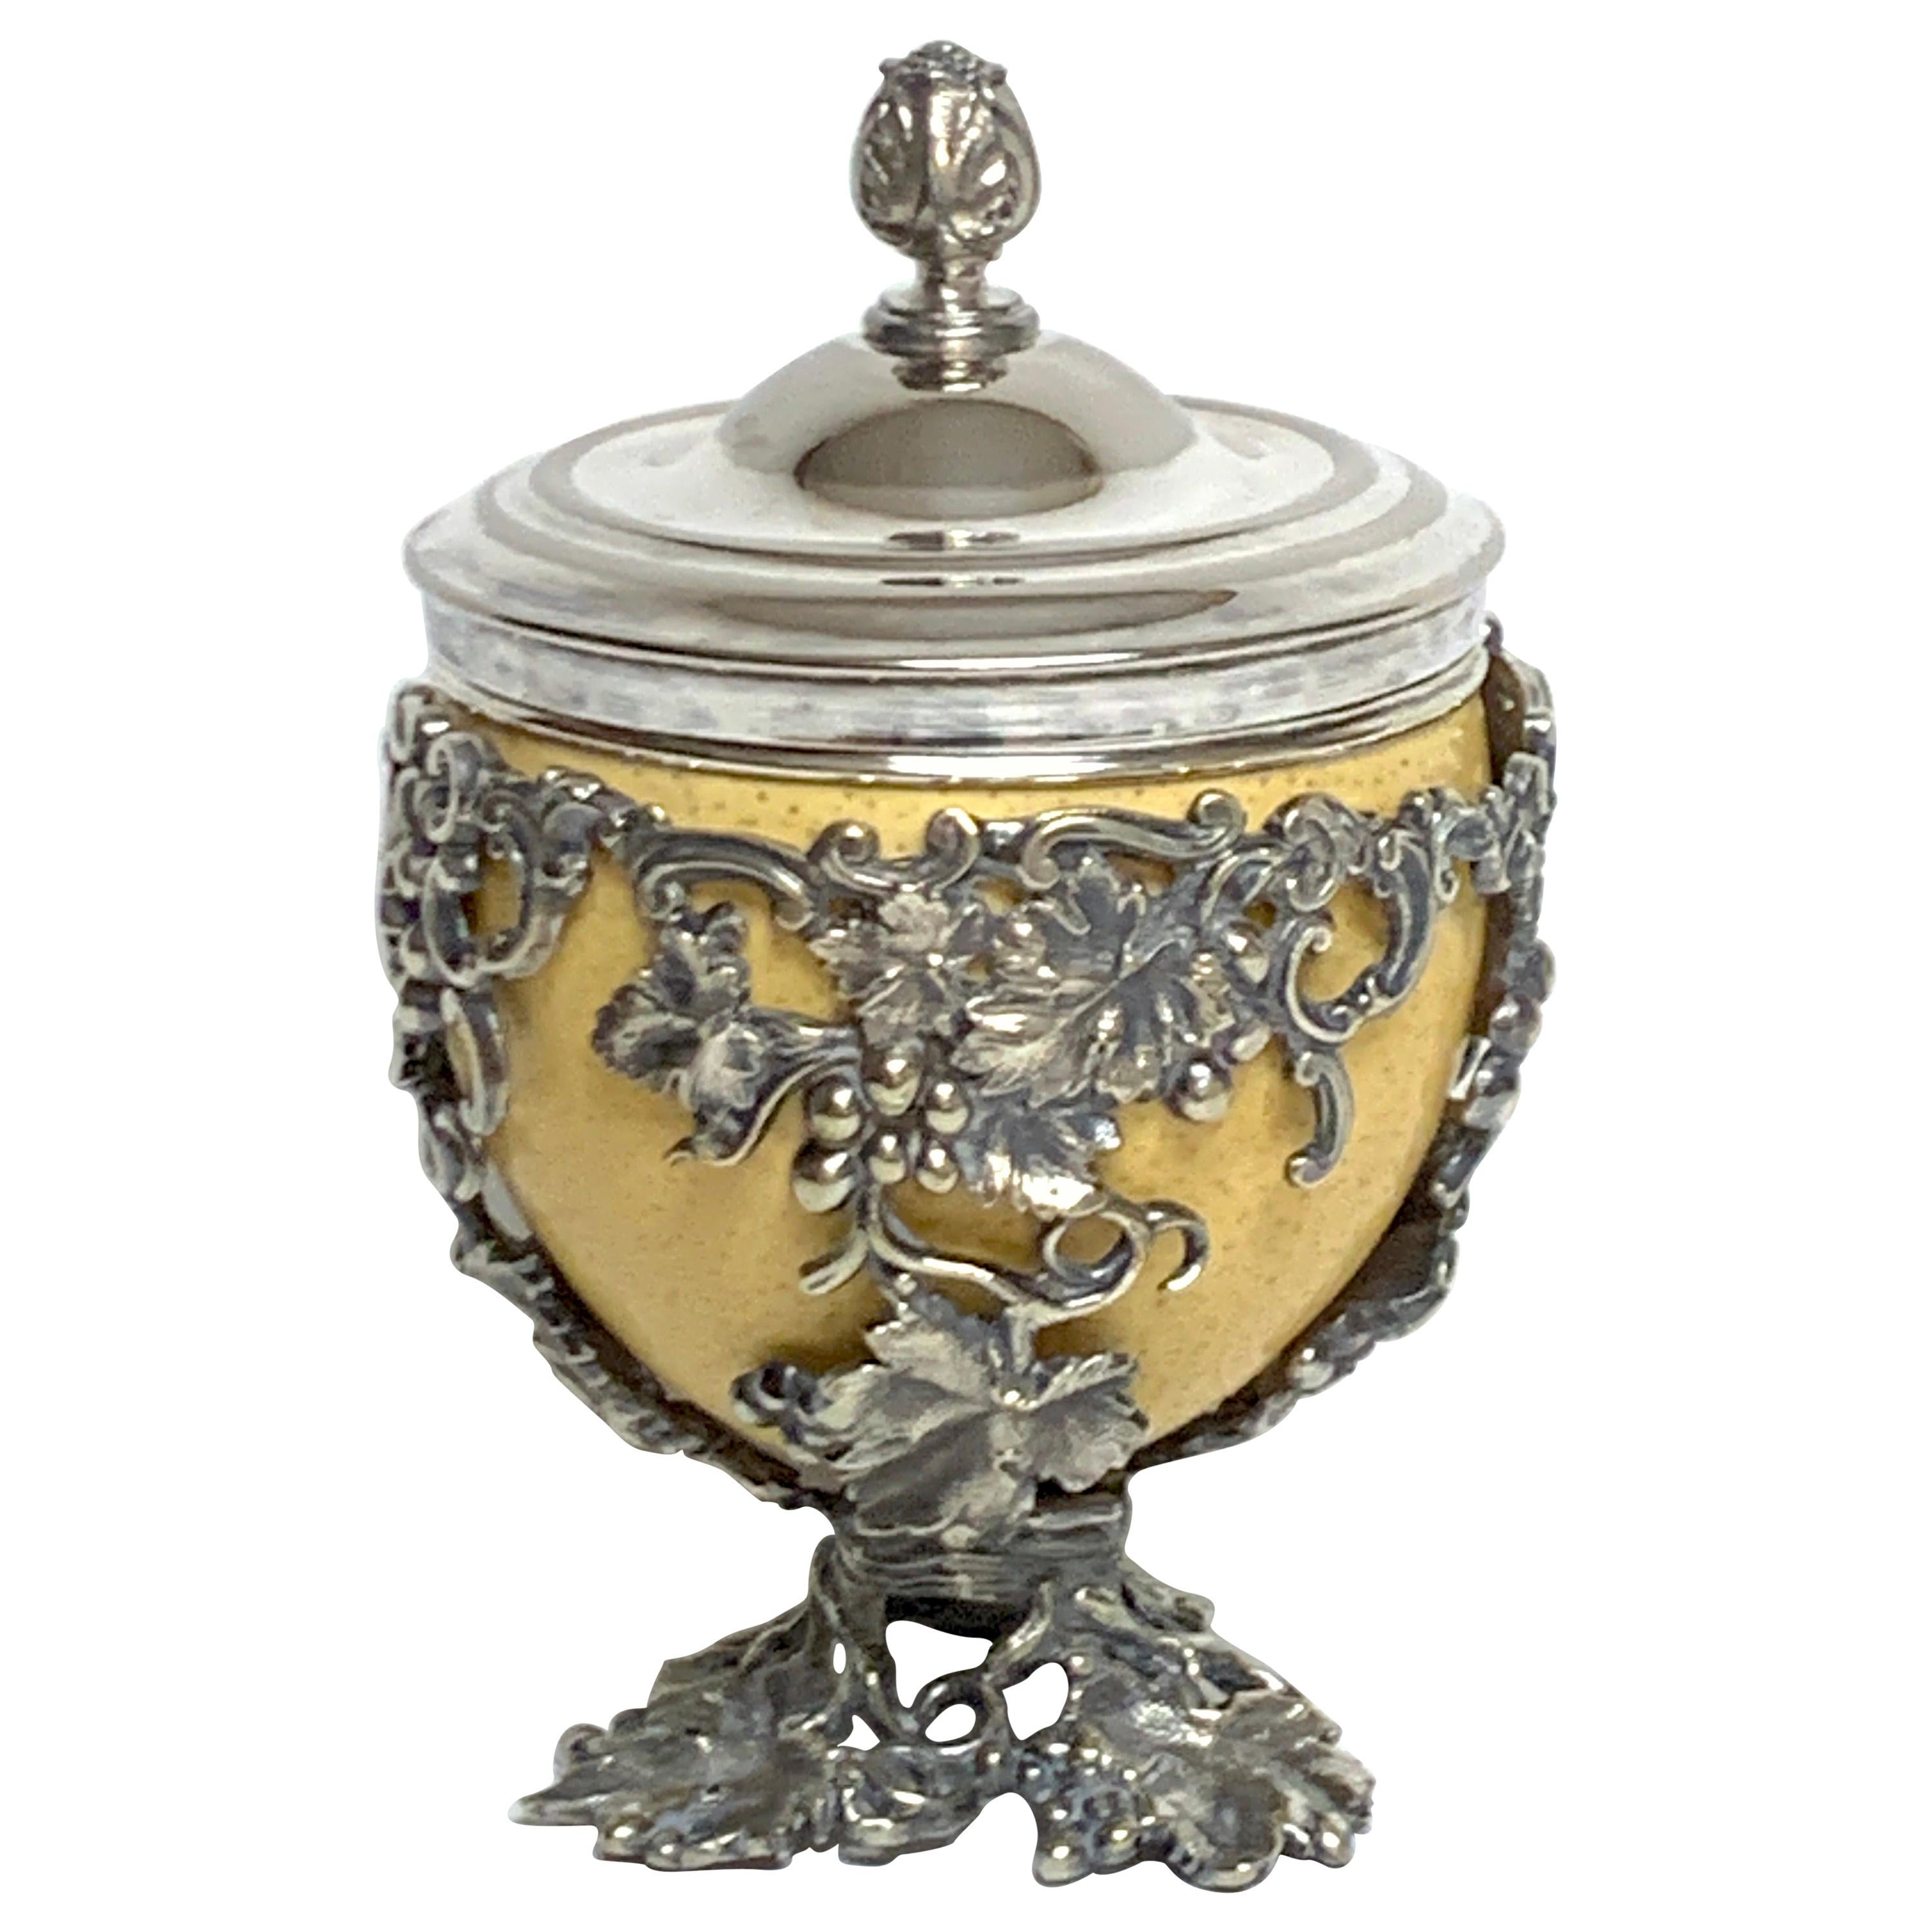 19th Century English Silver Plated Ostrich Egg Box Attributed to Elkington & Co.